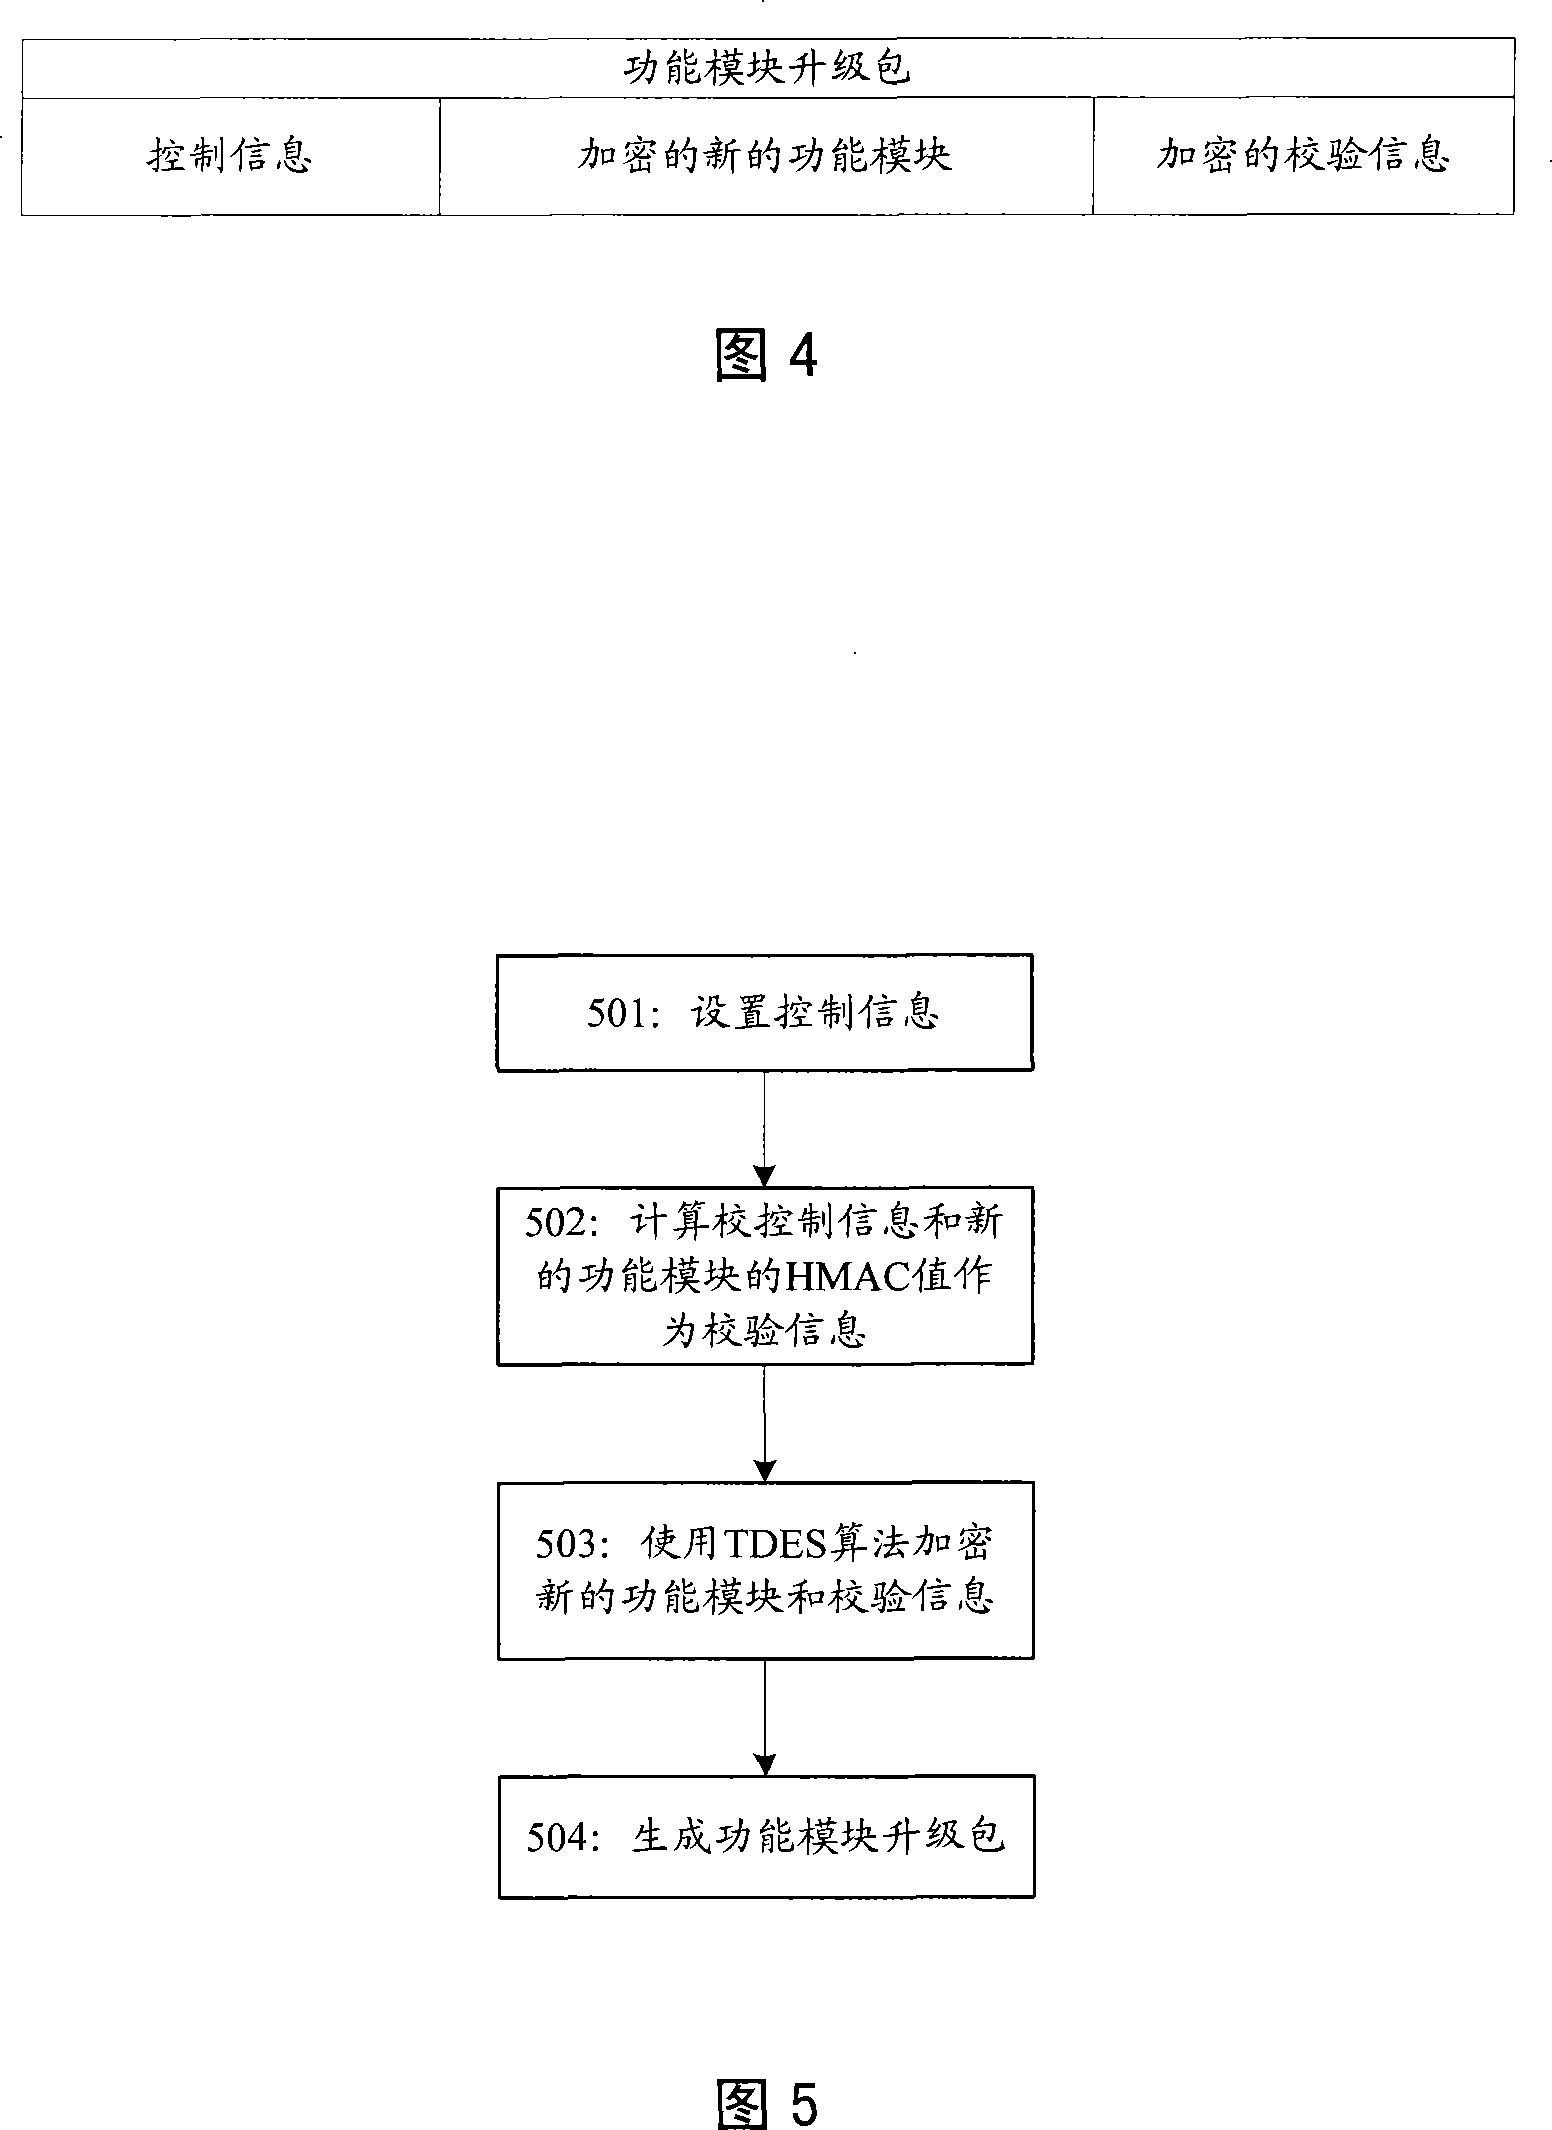 Method for performing safety controllable remote upgrade for software protecting device